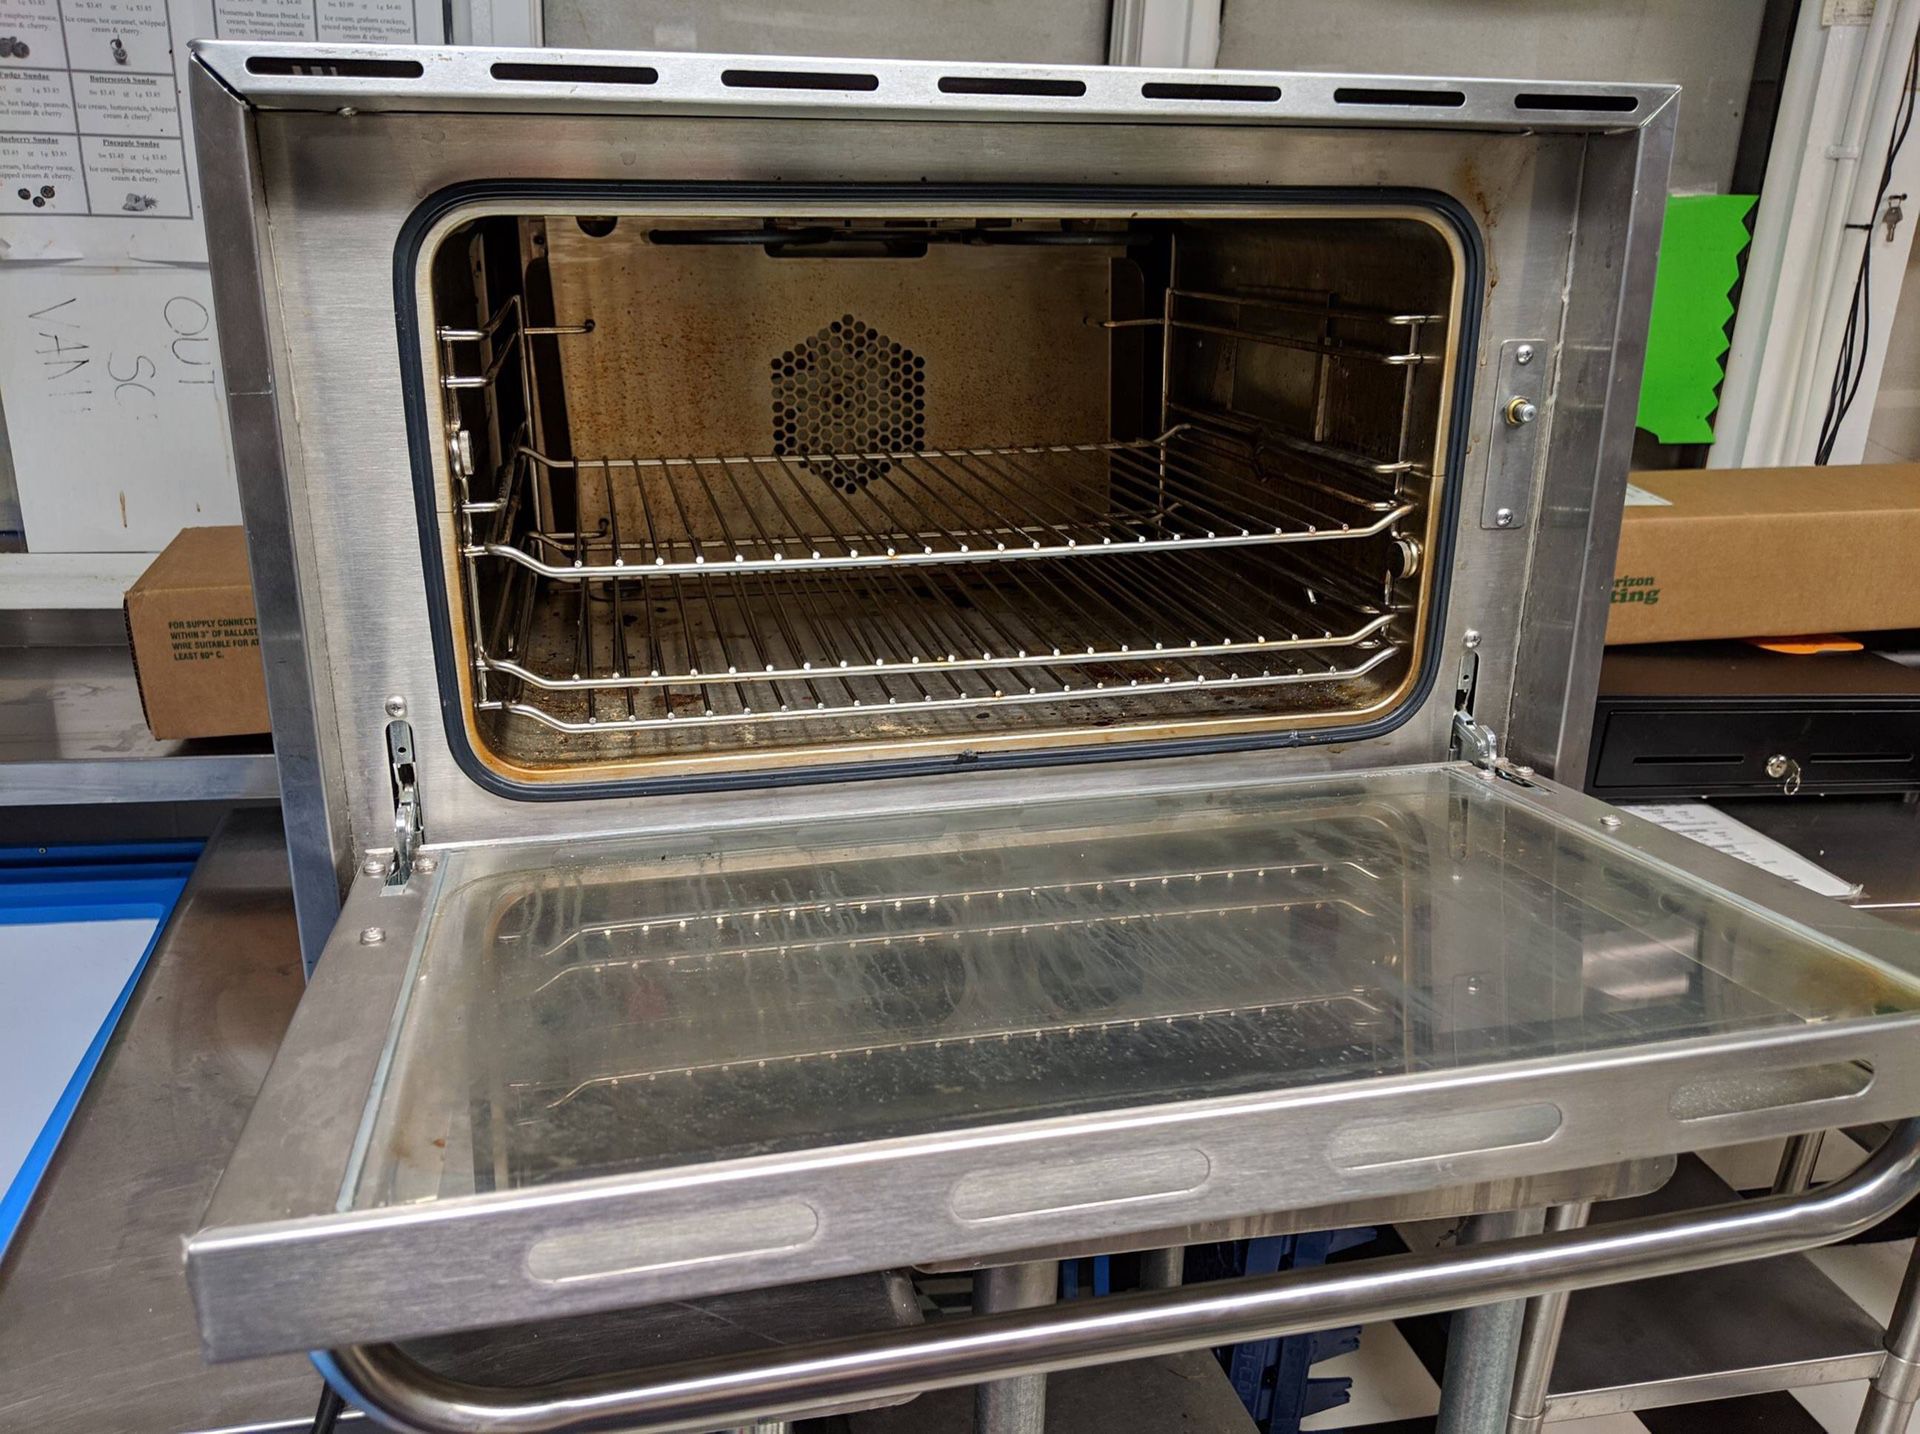 Proctor Silex - Toaster Oven for Sale in Lakeland, FL - OfferUp